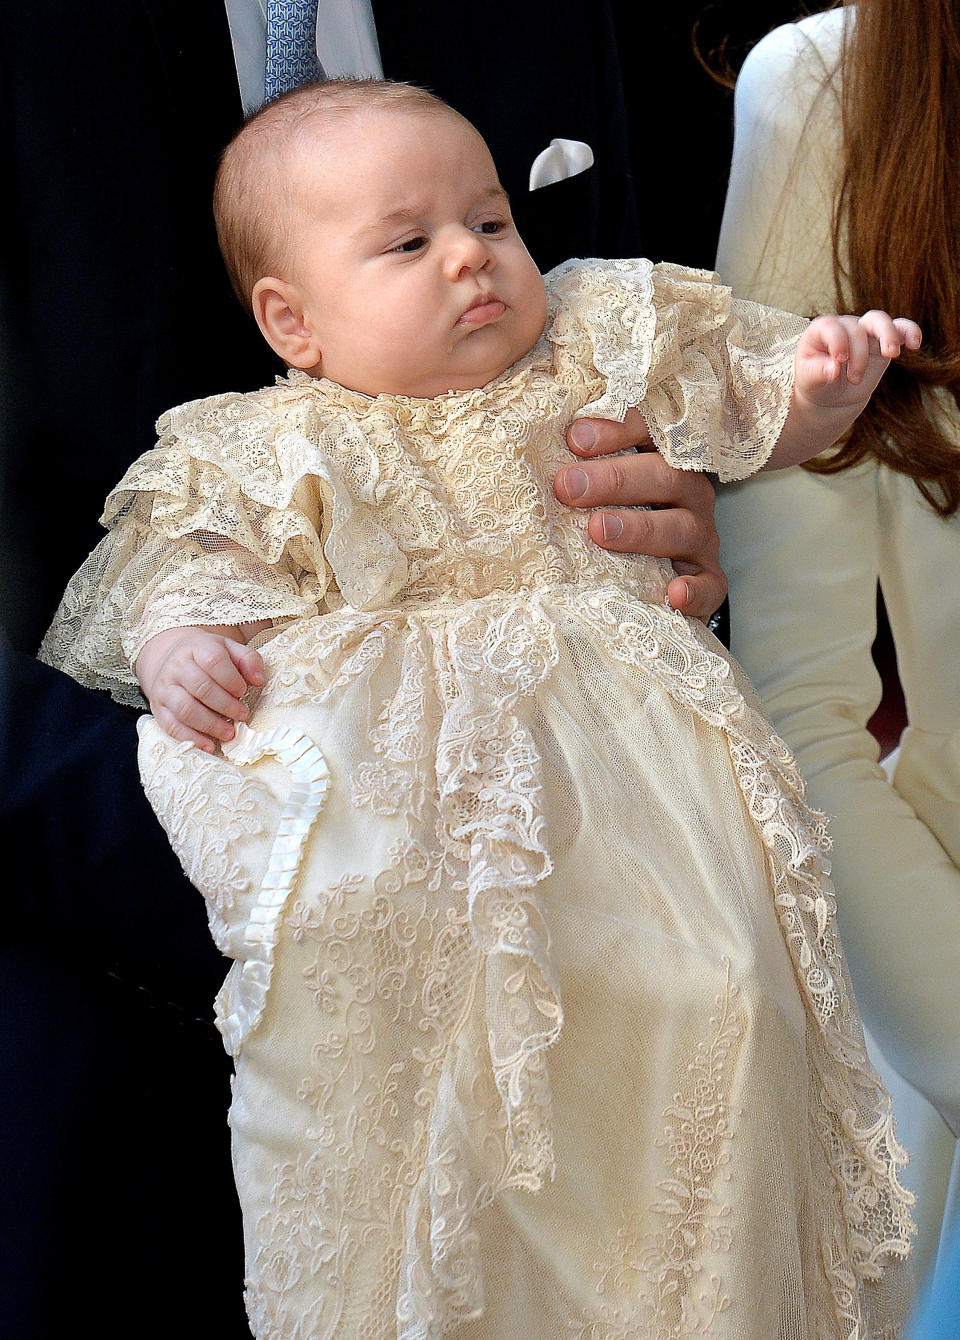 Prince George wearing the Honiton lace and white satin gown at his christening in October 2013. [Photo: Getty]